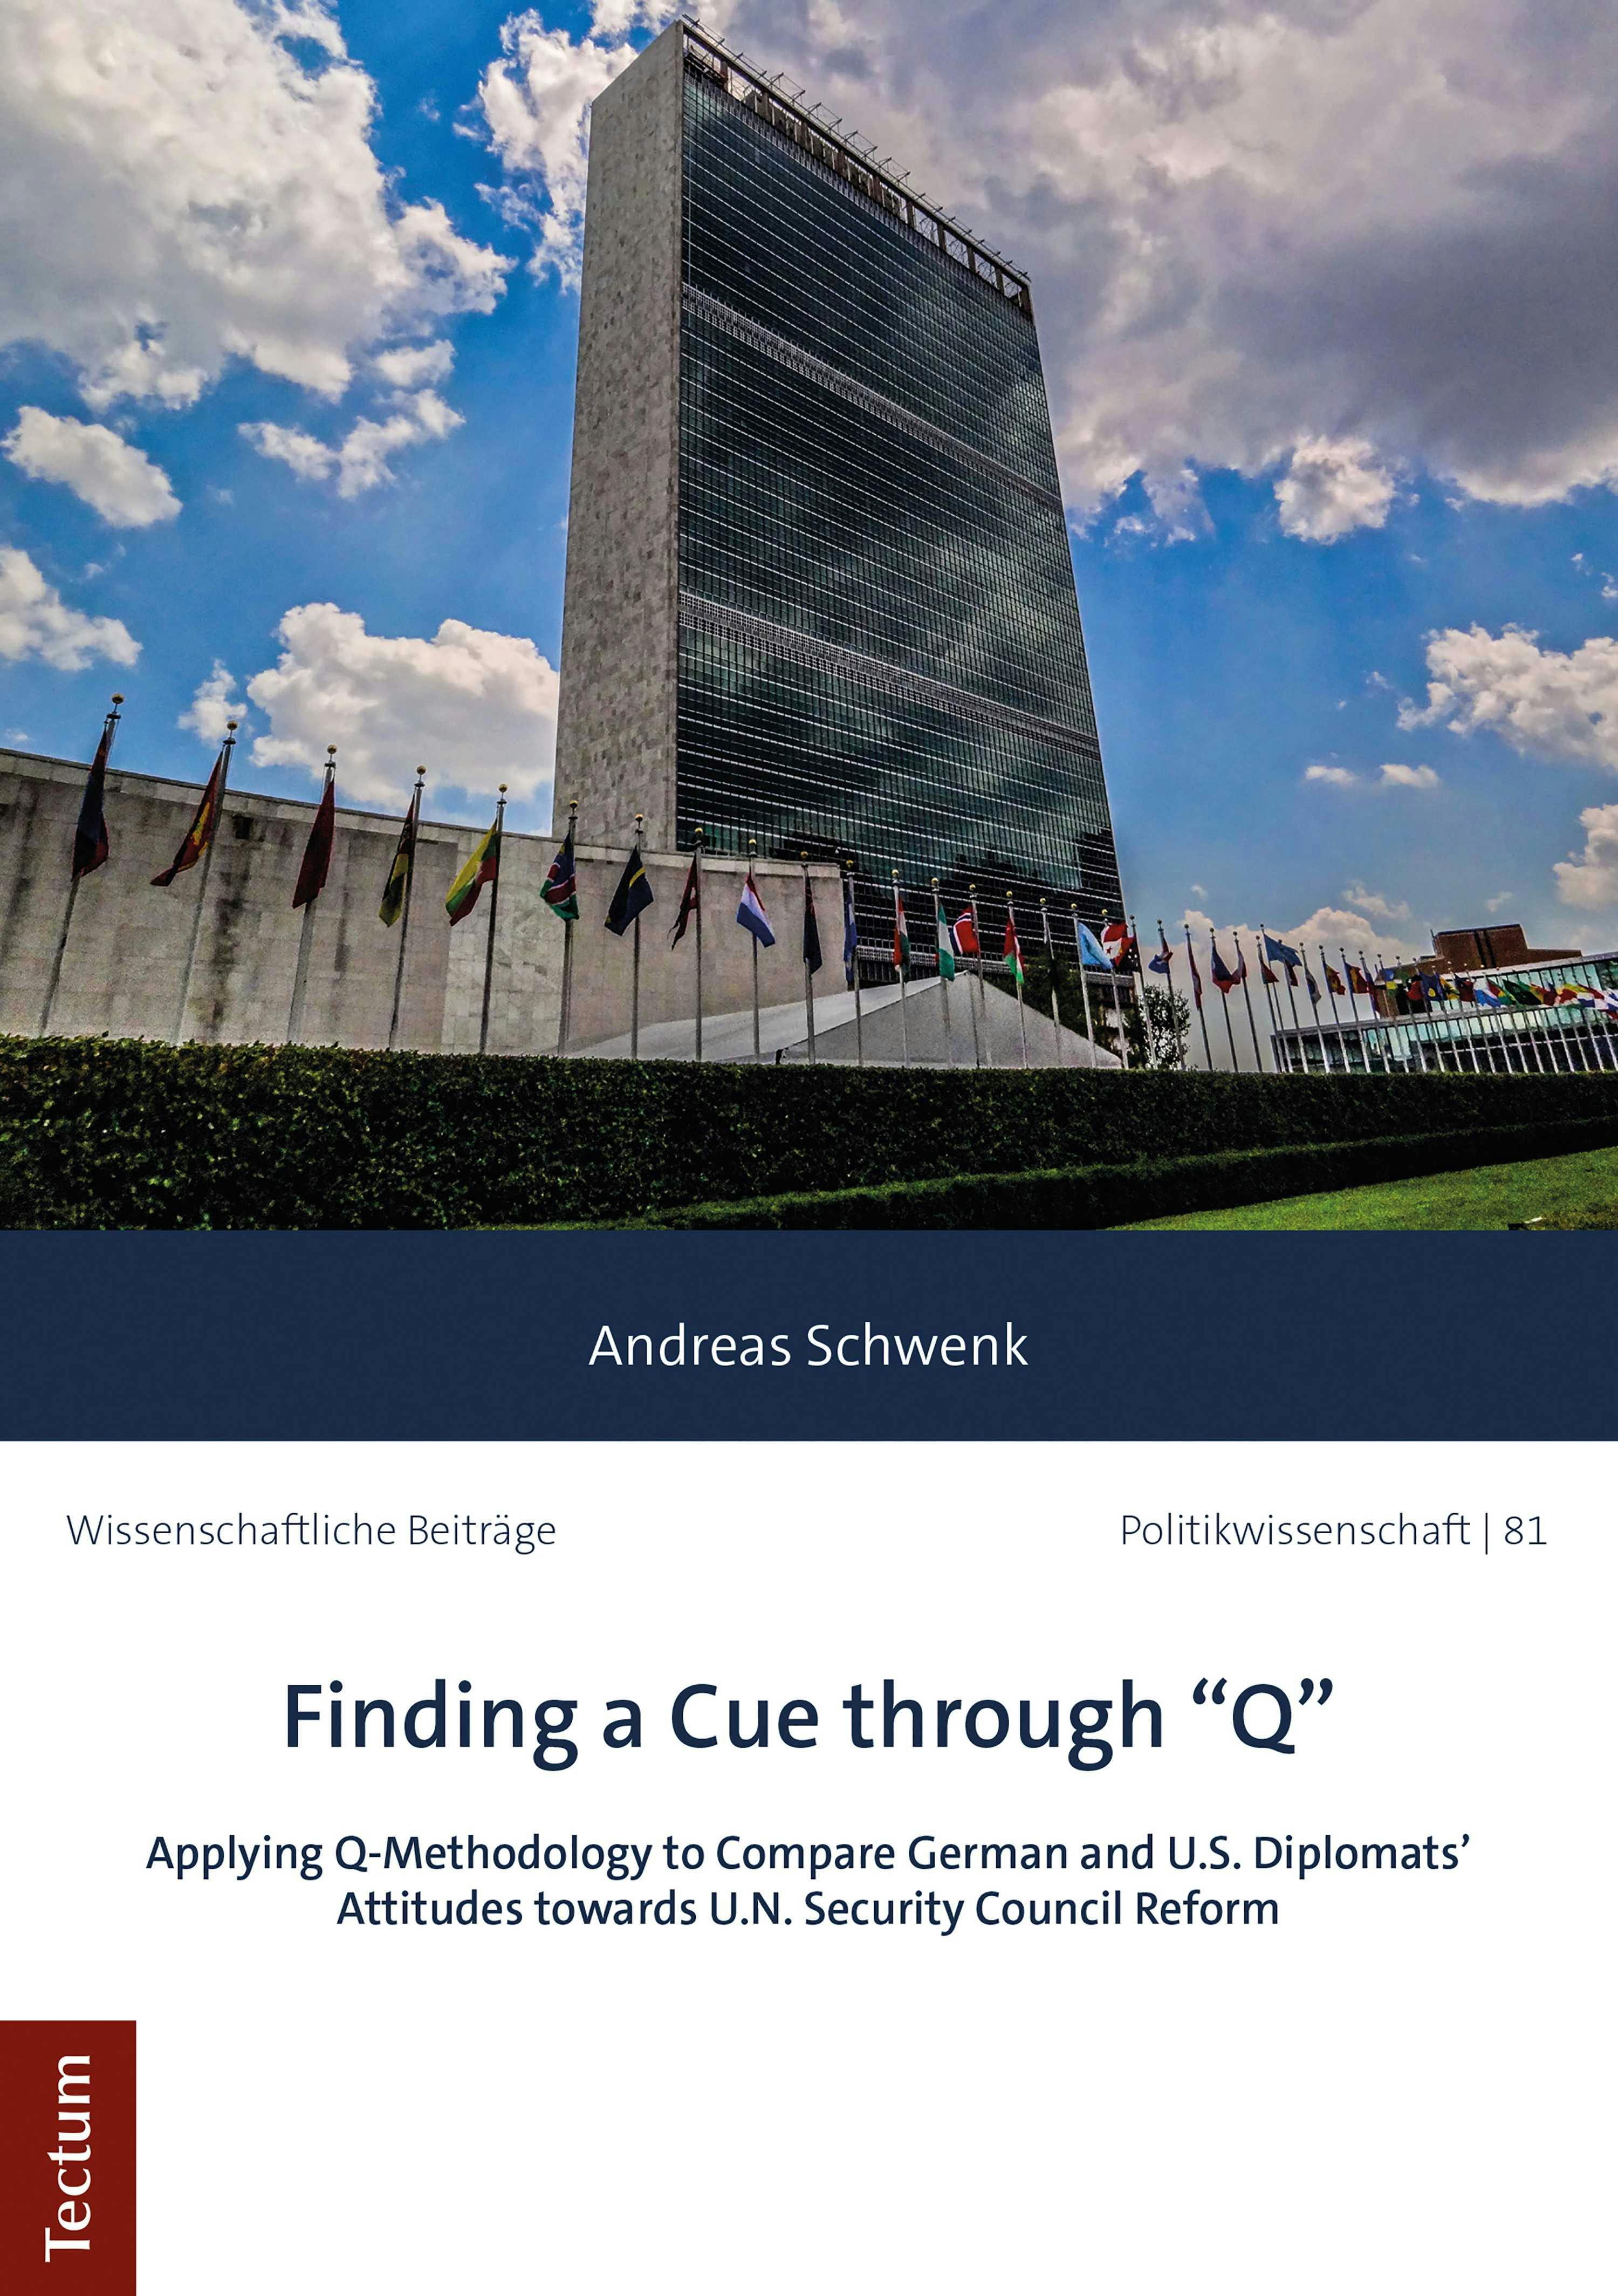 Finding a Cue through "Q": Applying Q-Methodology to Compare German and U.S. Diplomats' Attitudes towards U.N. Security Council Reform - Andreas Schwenk